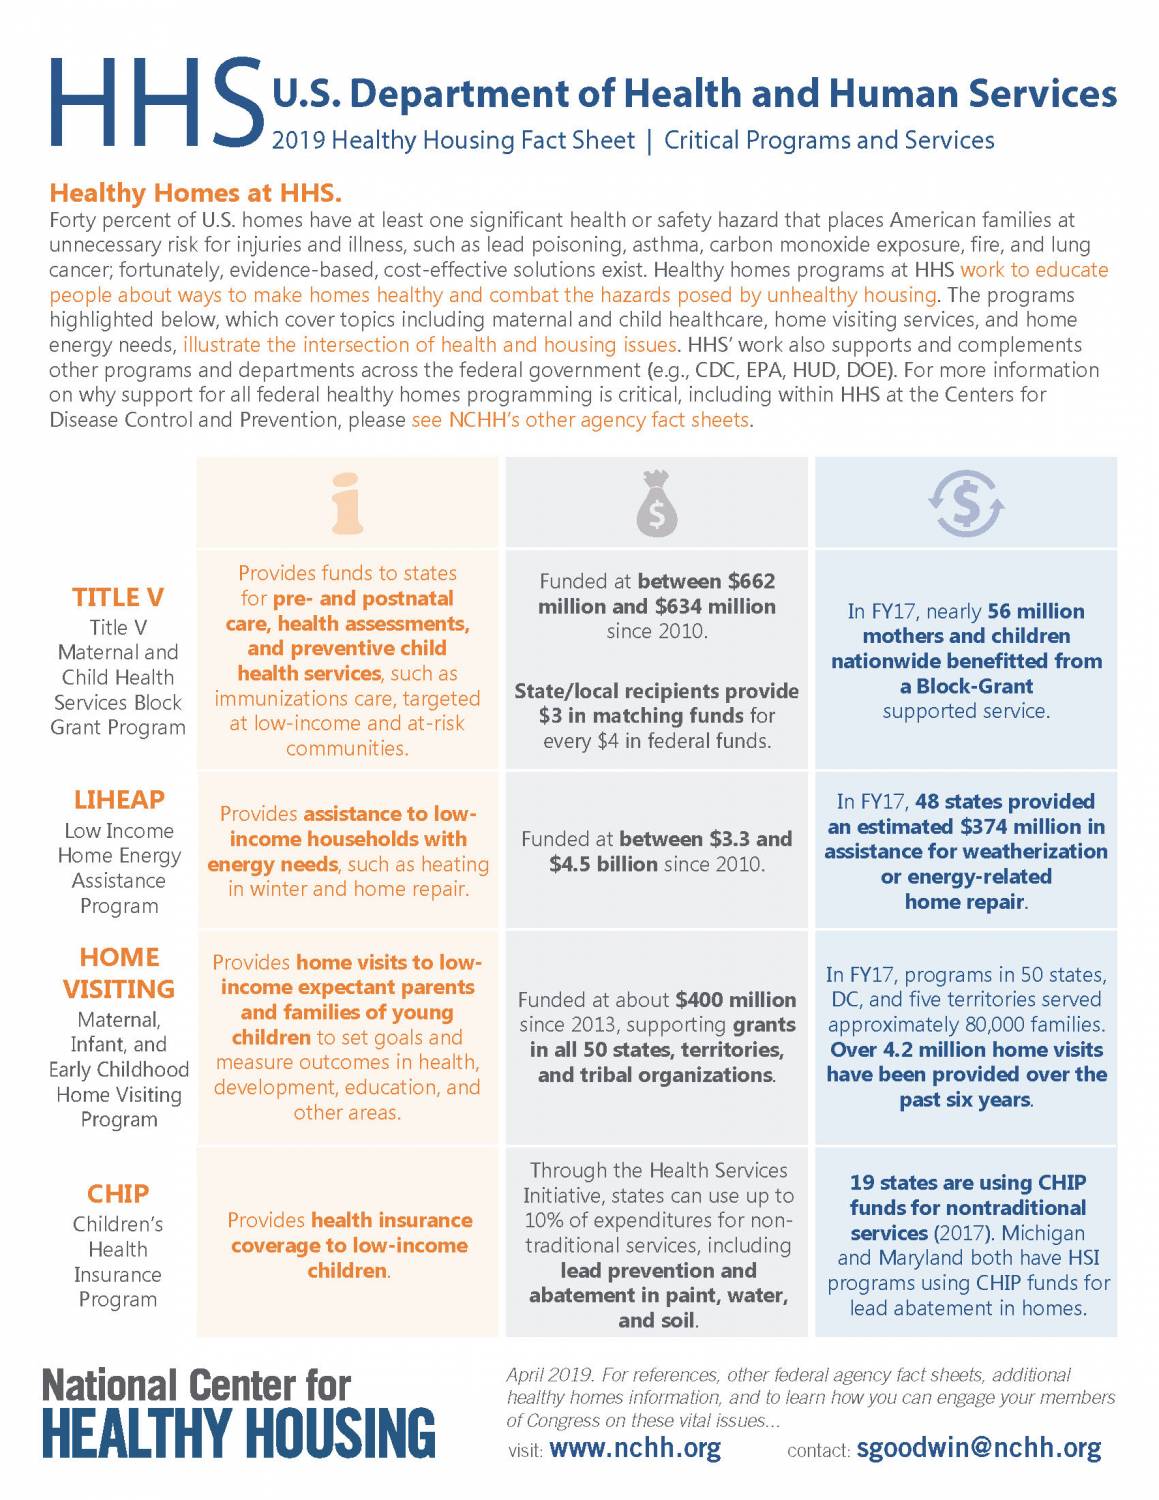 Healthy Housing Agency Fact Sheet - HHS